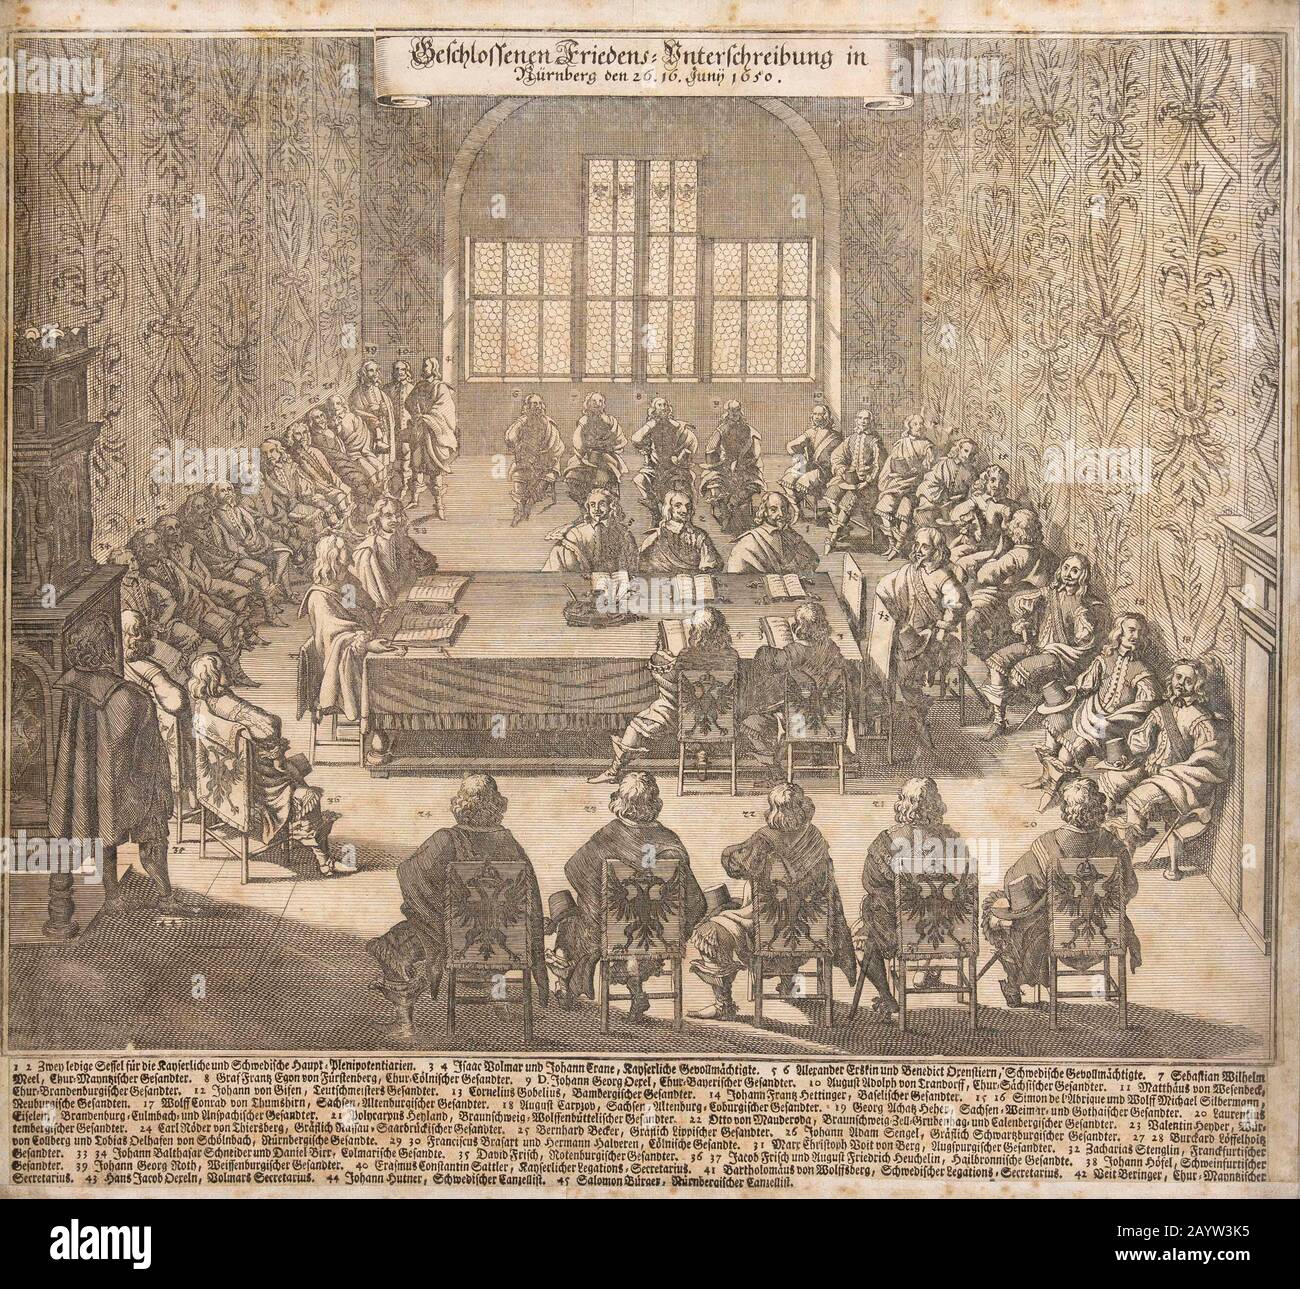 The ratification of the Peace of Westphalia in Nuremberg on June 26, 1650. Museum: PRIVATE COLLECTION. Author: CASPAR MERIAN. Stock Photo